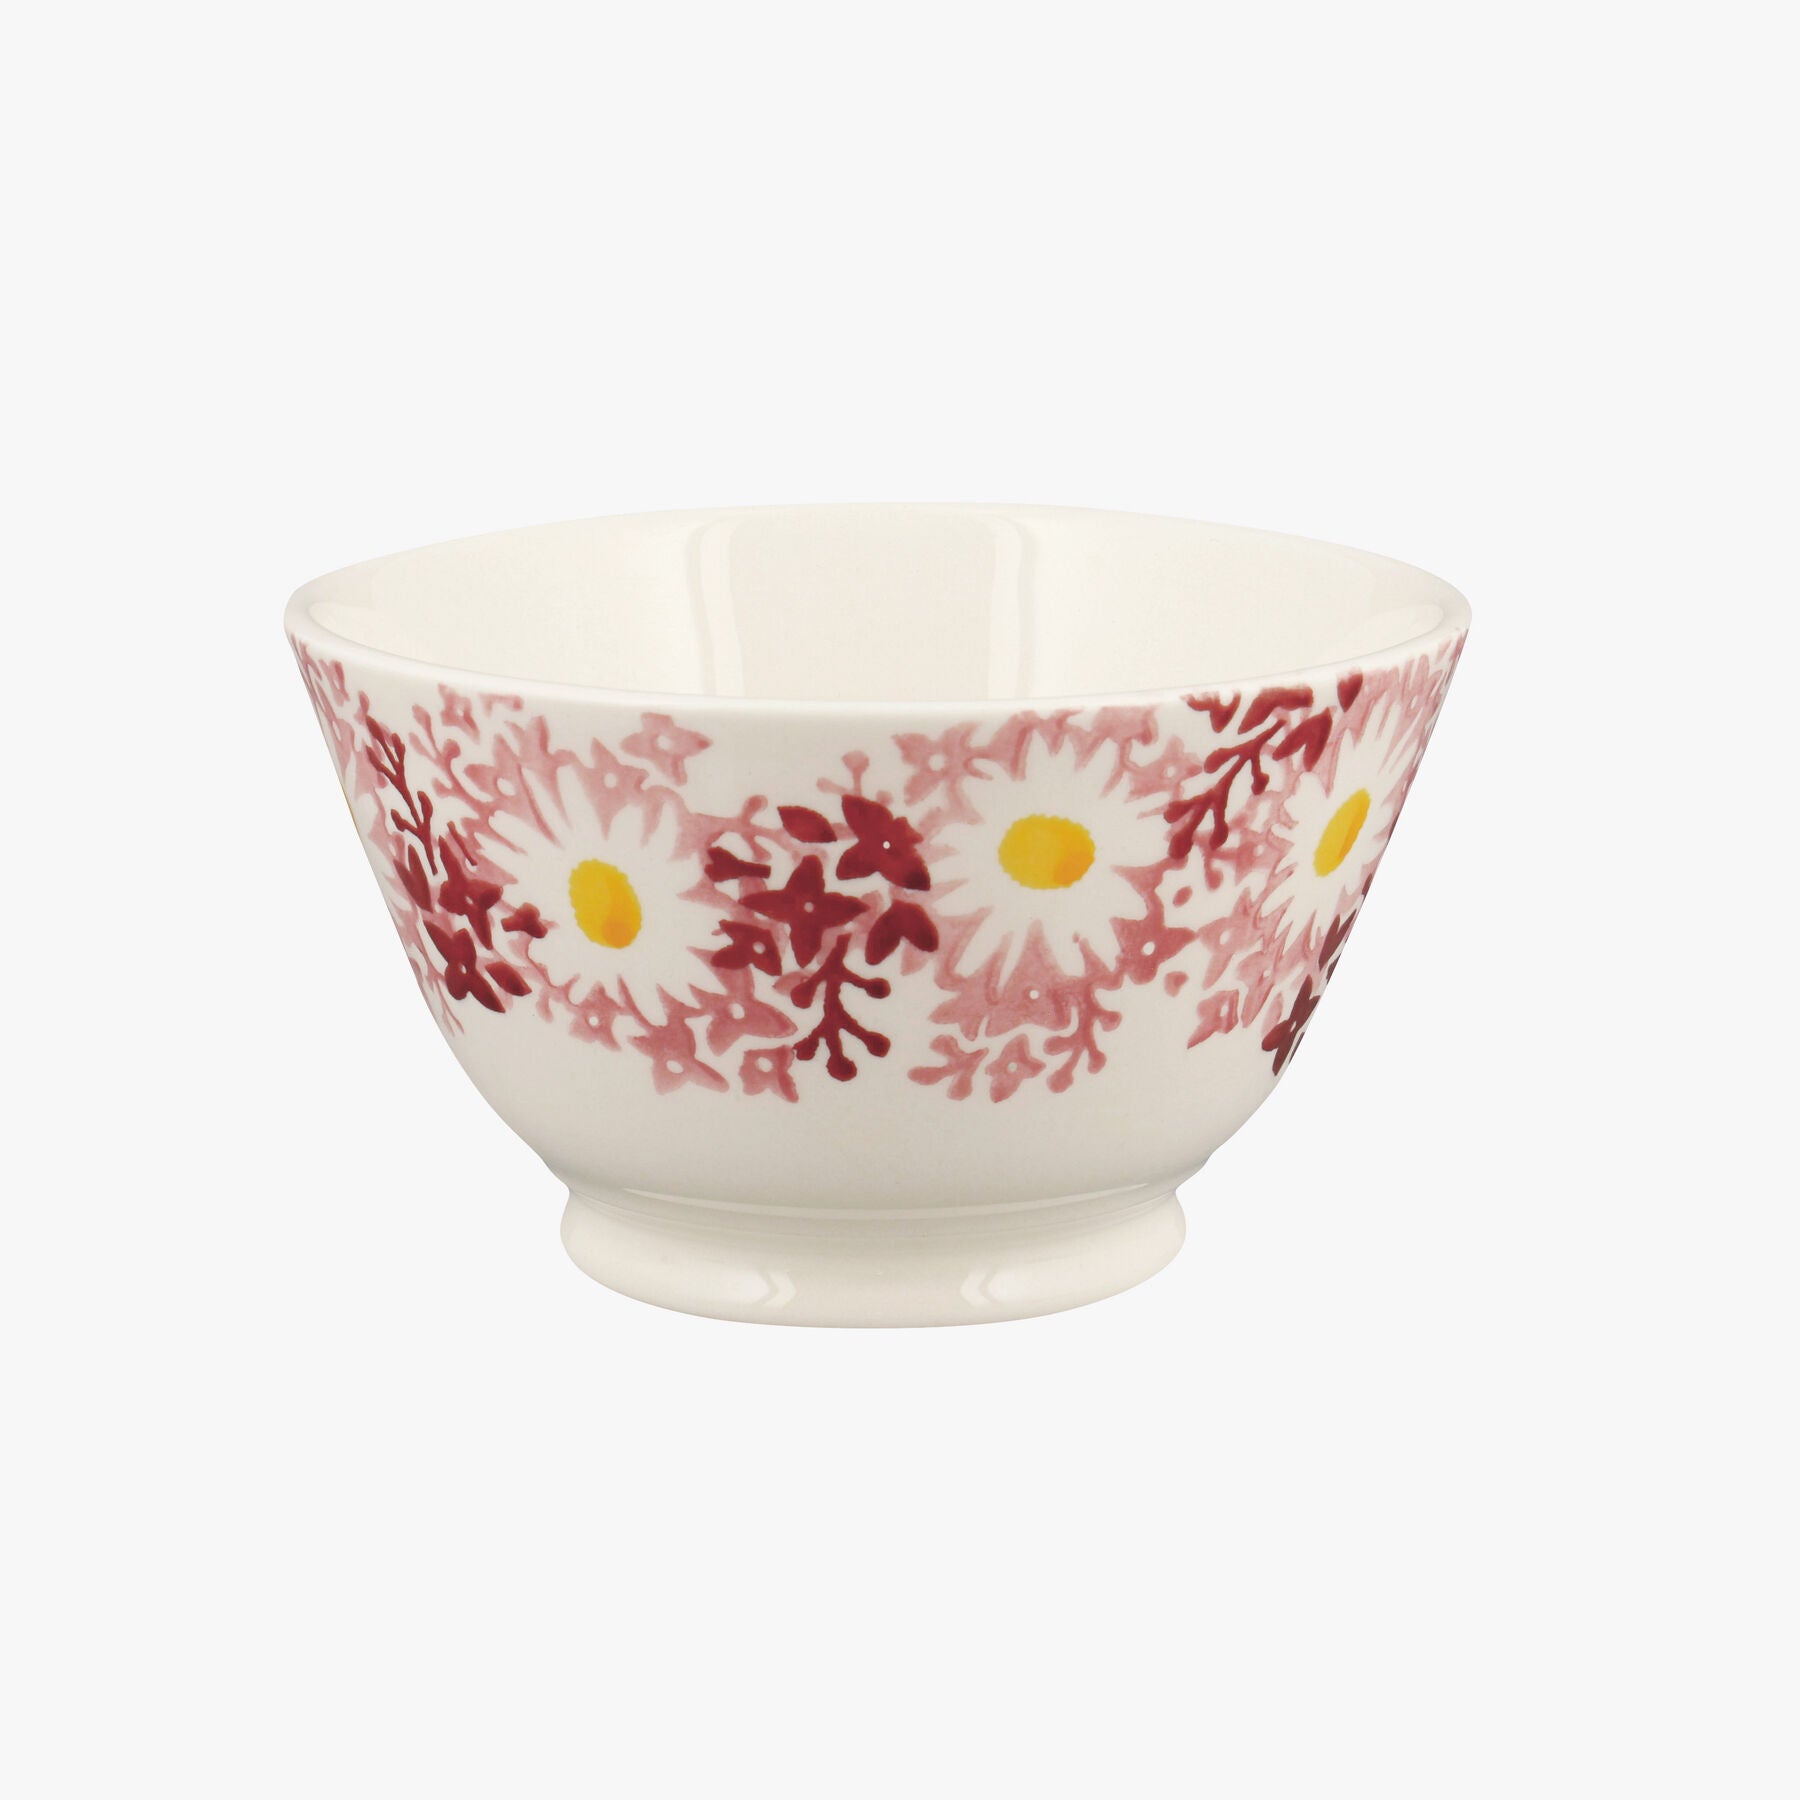 Pink Daisy Fields Small Old Bowl - Unique Handmade & Handpainted English Earthenware Decorative Plat